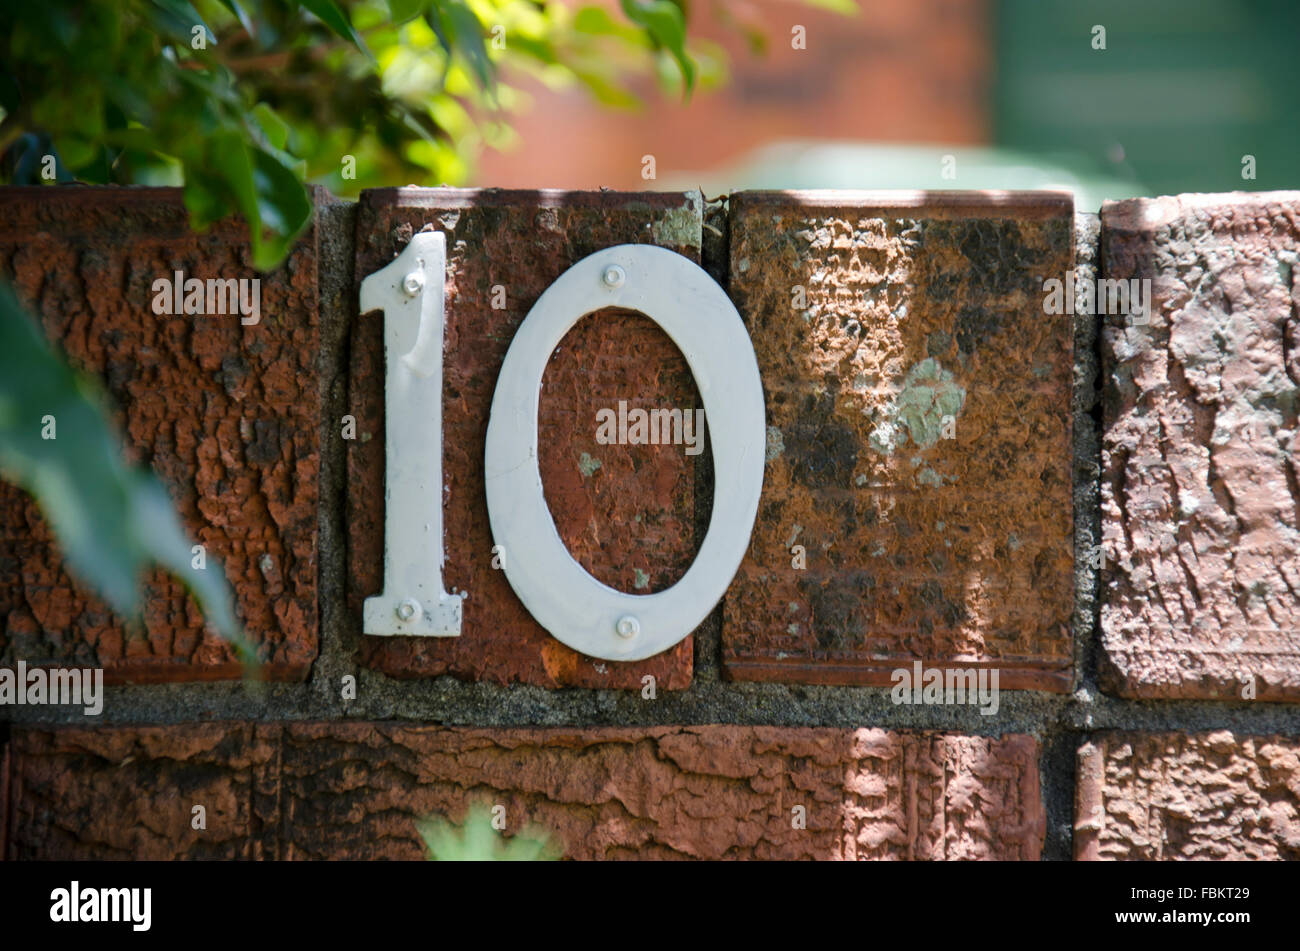 A metal plate house number 10 screwed into a brick wall in Australia Stock Photo